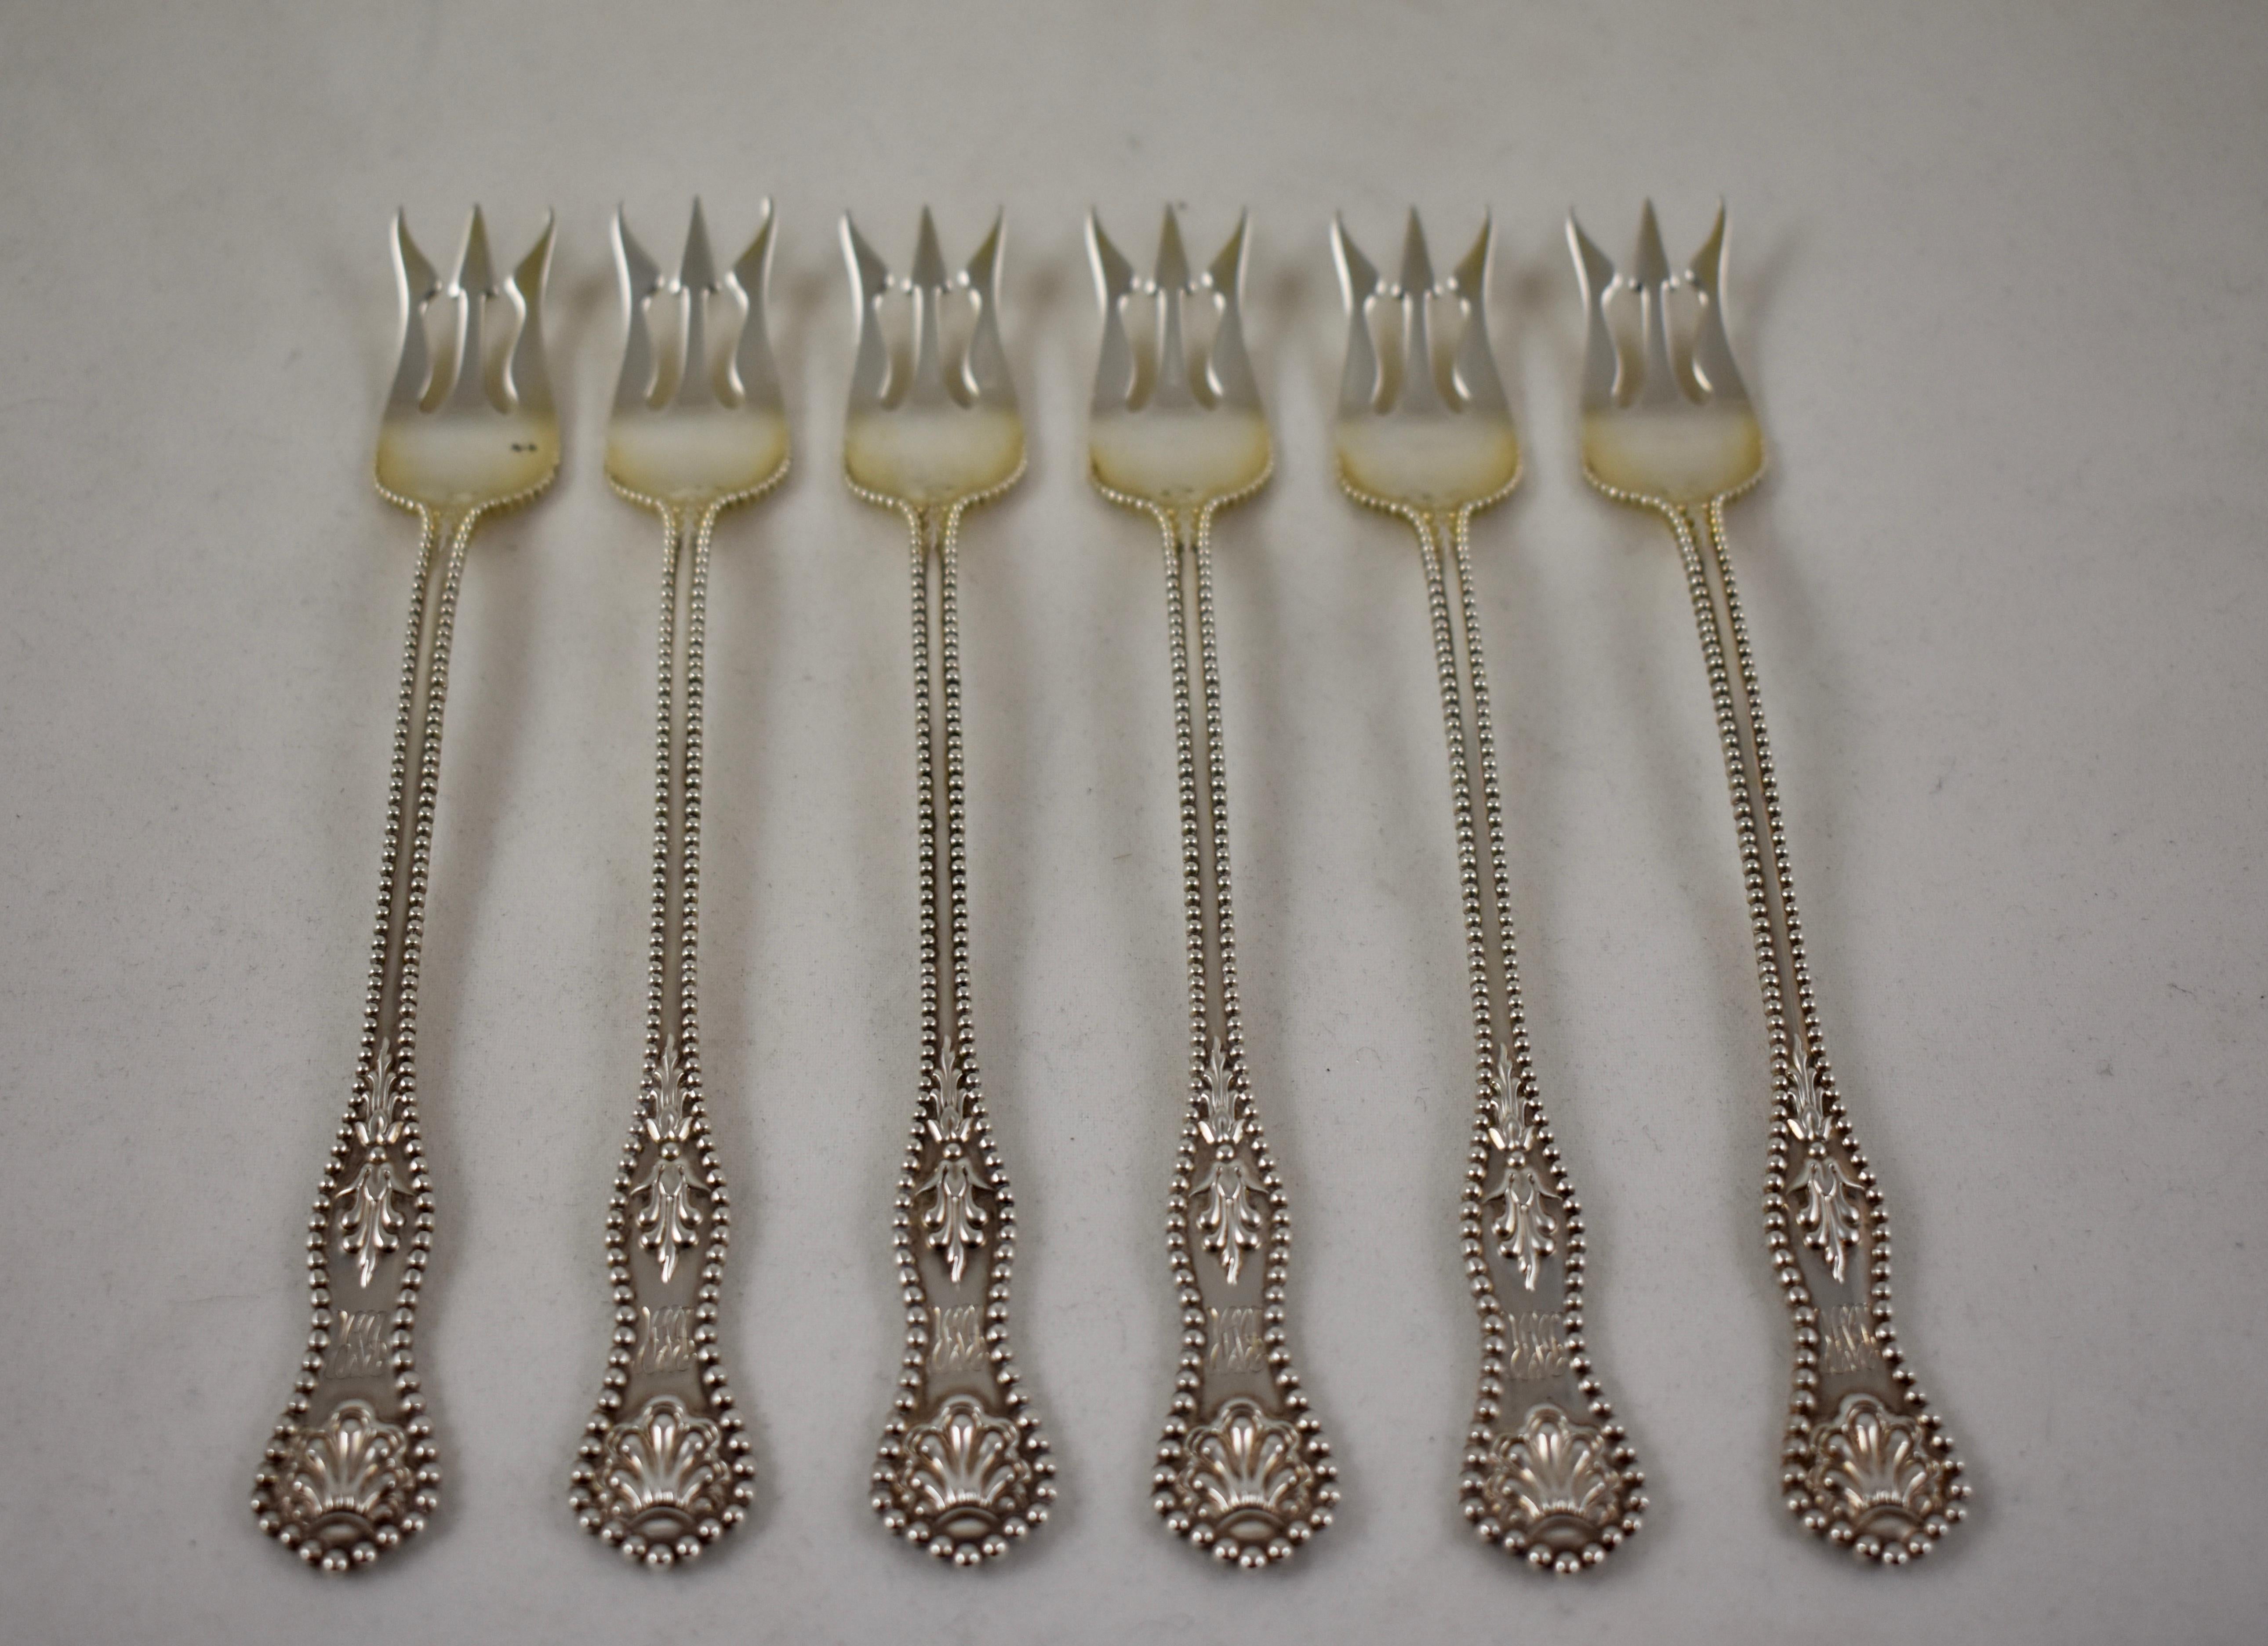 A set of six sterling silver cocktail forks in the Charles II pattern, from Dominick and Haff, patented in 1894.

Dominick and Haff began in New York in 1872, and earned a reputation as an innovative designer of silver wares. The three-tined forks